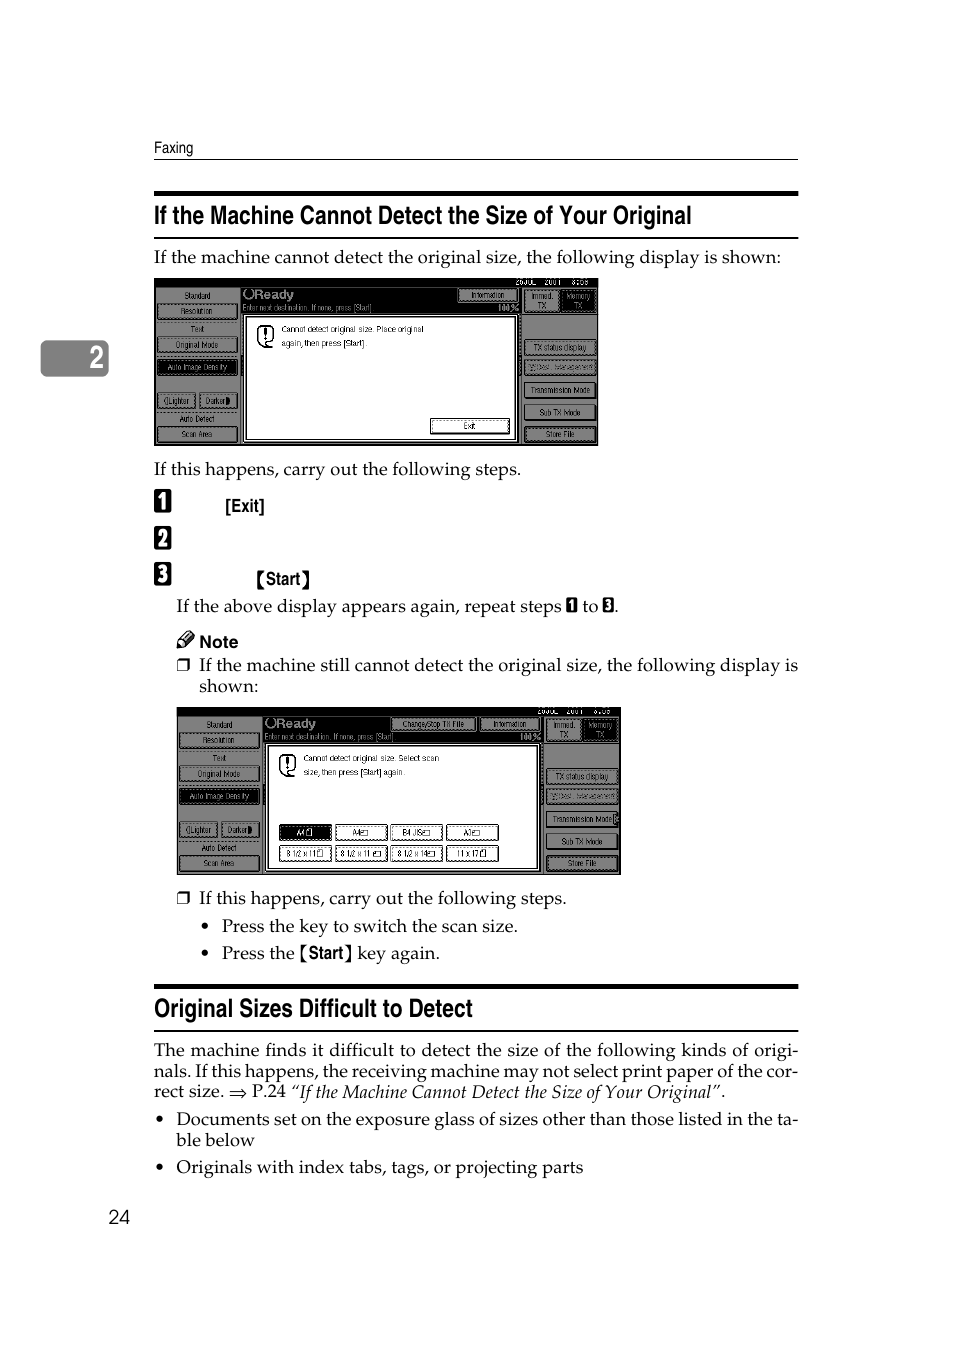 Original sizes difficult to detect | LG Option Type 1045 User Manual | Page 32 / 89